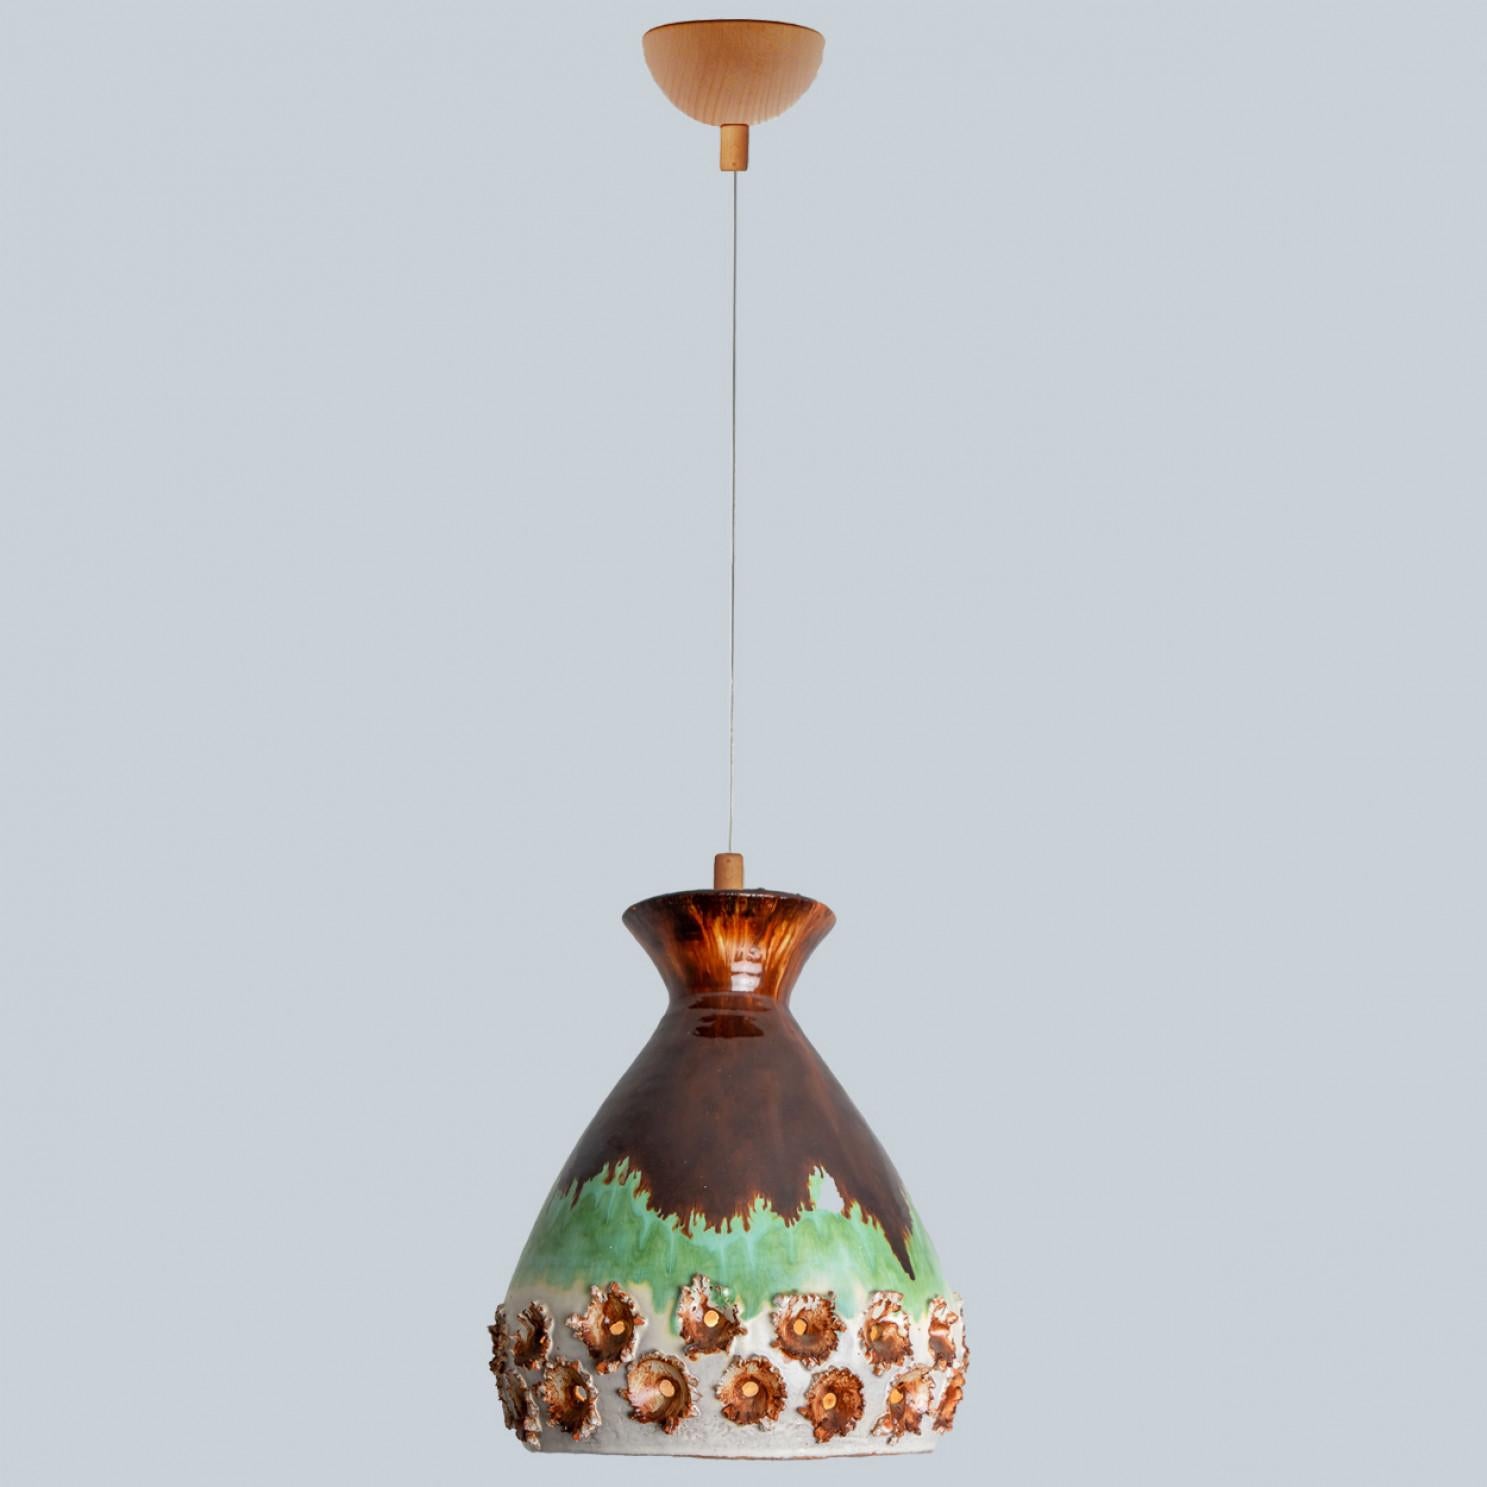 Stunning round hanging lamp with an unusual egg-like shape, made with rich colored green and brown ceramics, manufactured in the 1970s in Denmark. We also have a multitude of unique colored ceramic light sets and arrangements, all available on the